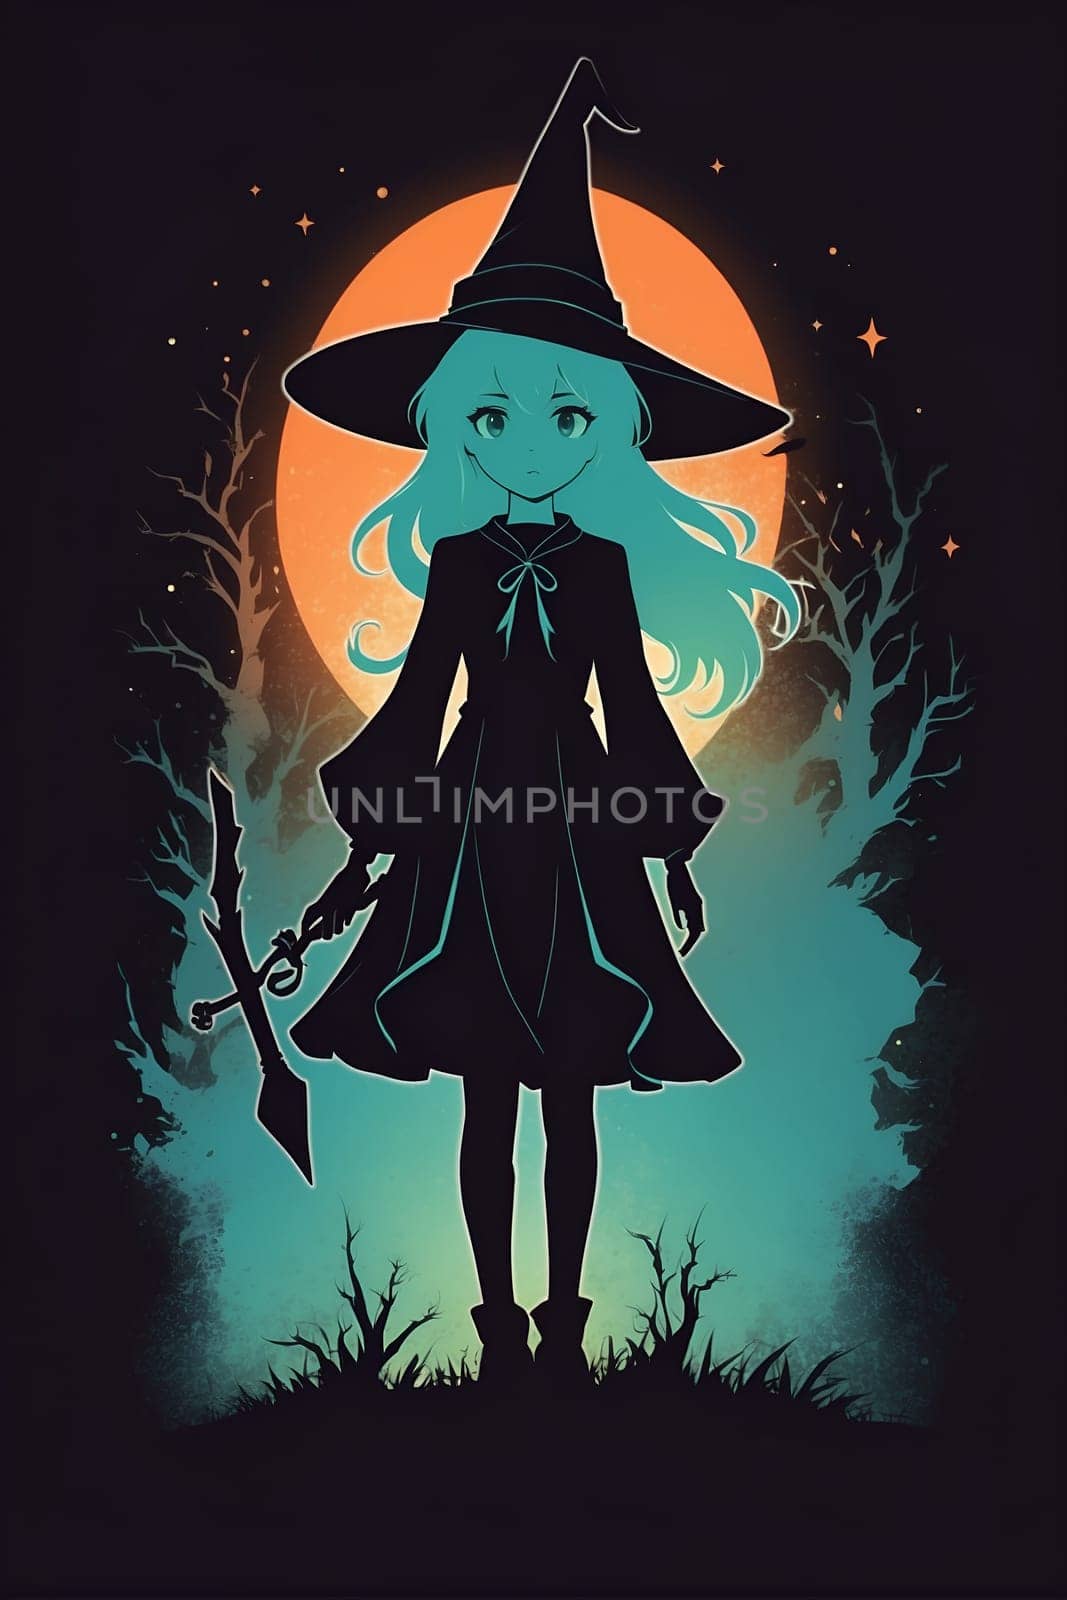 A girl dressed in a witch costume confidently holds a broom.